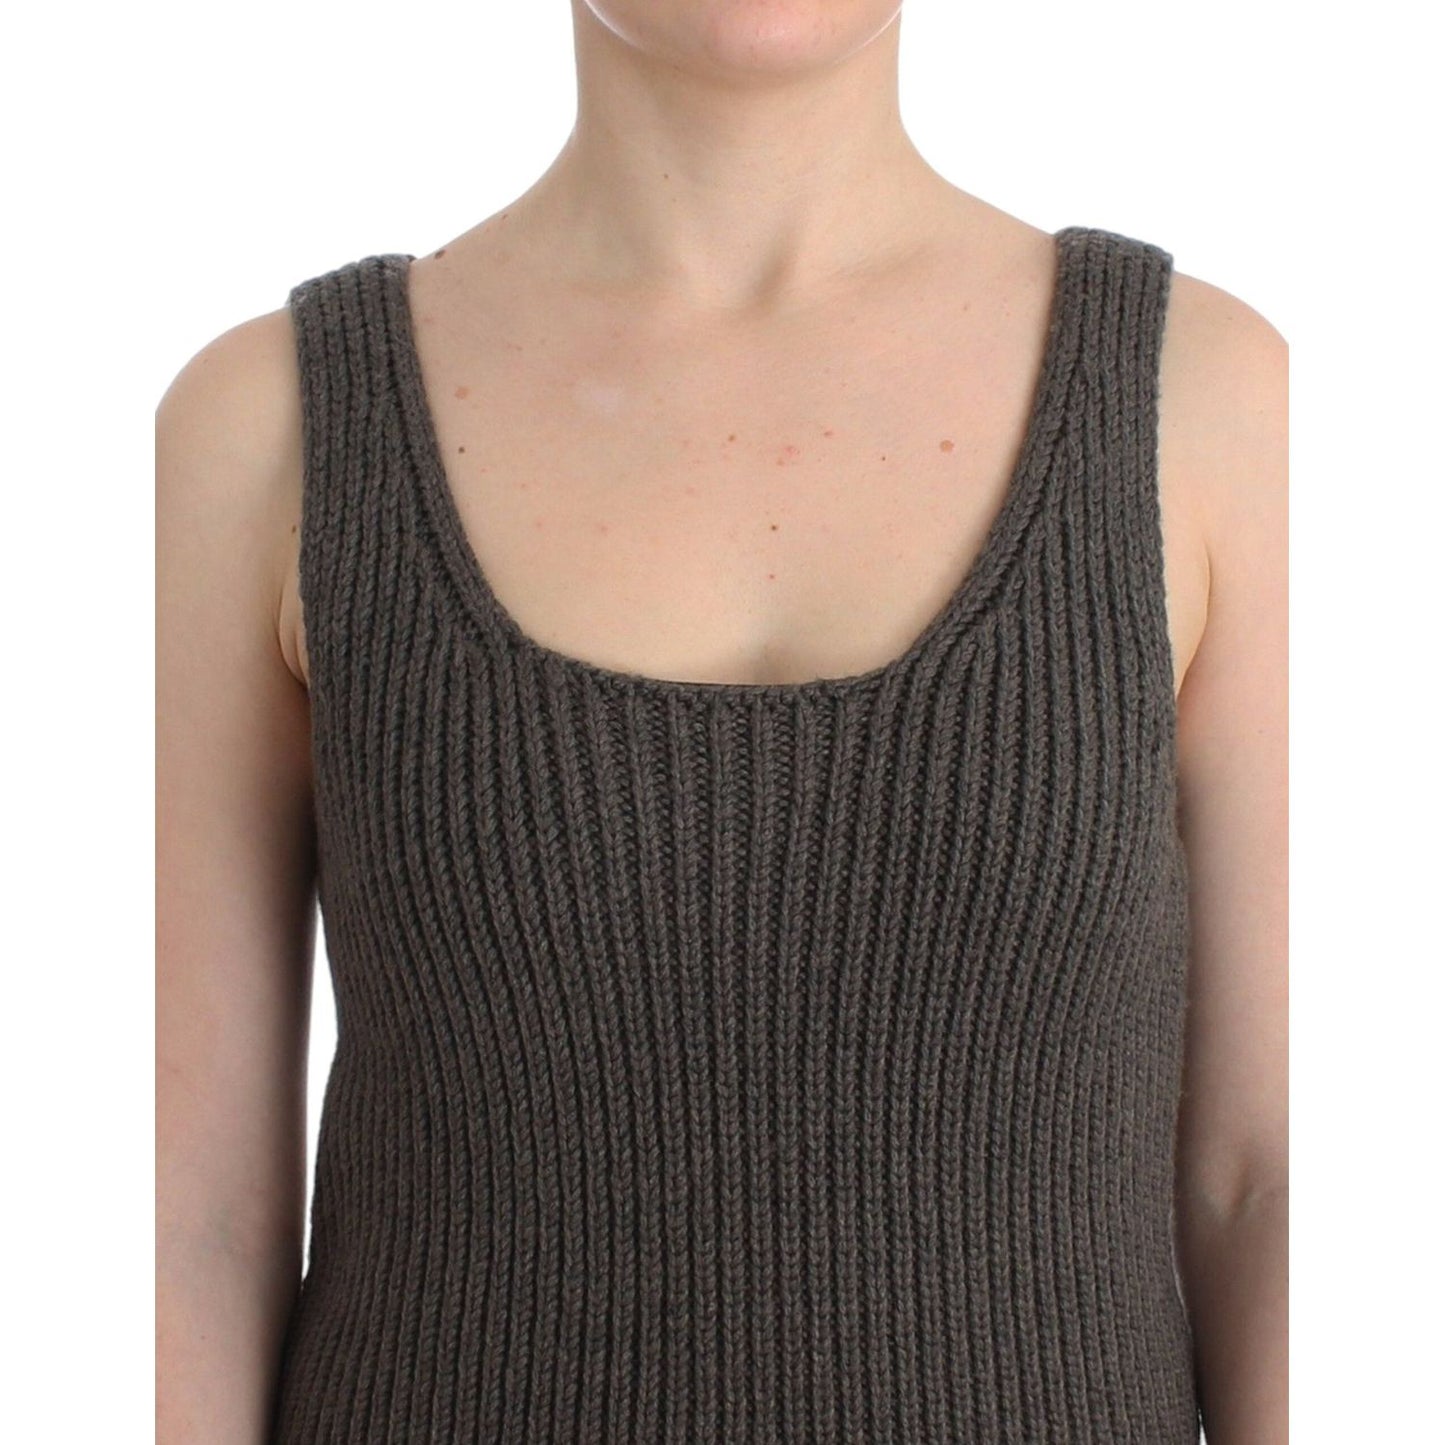 Ermanno Scervino Chic Gray Knit Crew Neck Top gray-knit-top-knitted-sweater-merino-wool